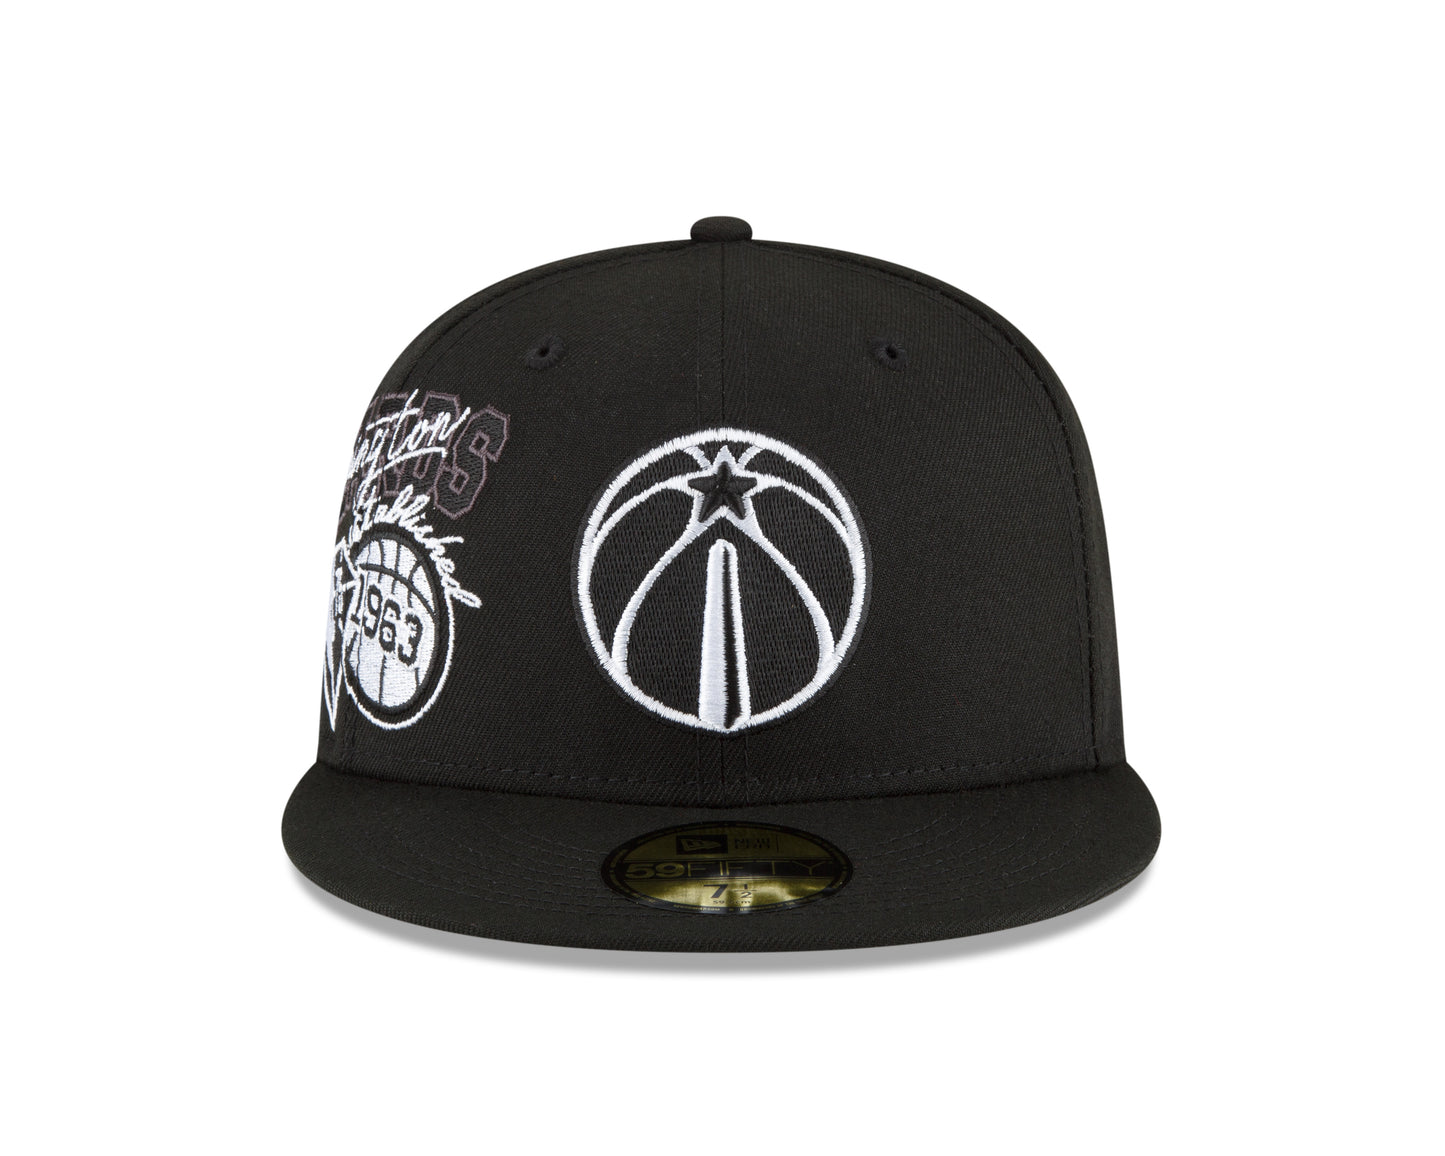 Washington Wizards New Era Black and White Back Half 59fifty Fitted Hat